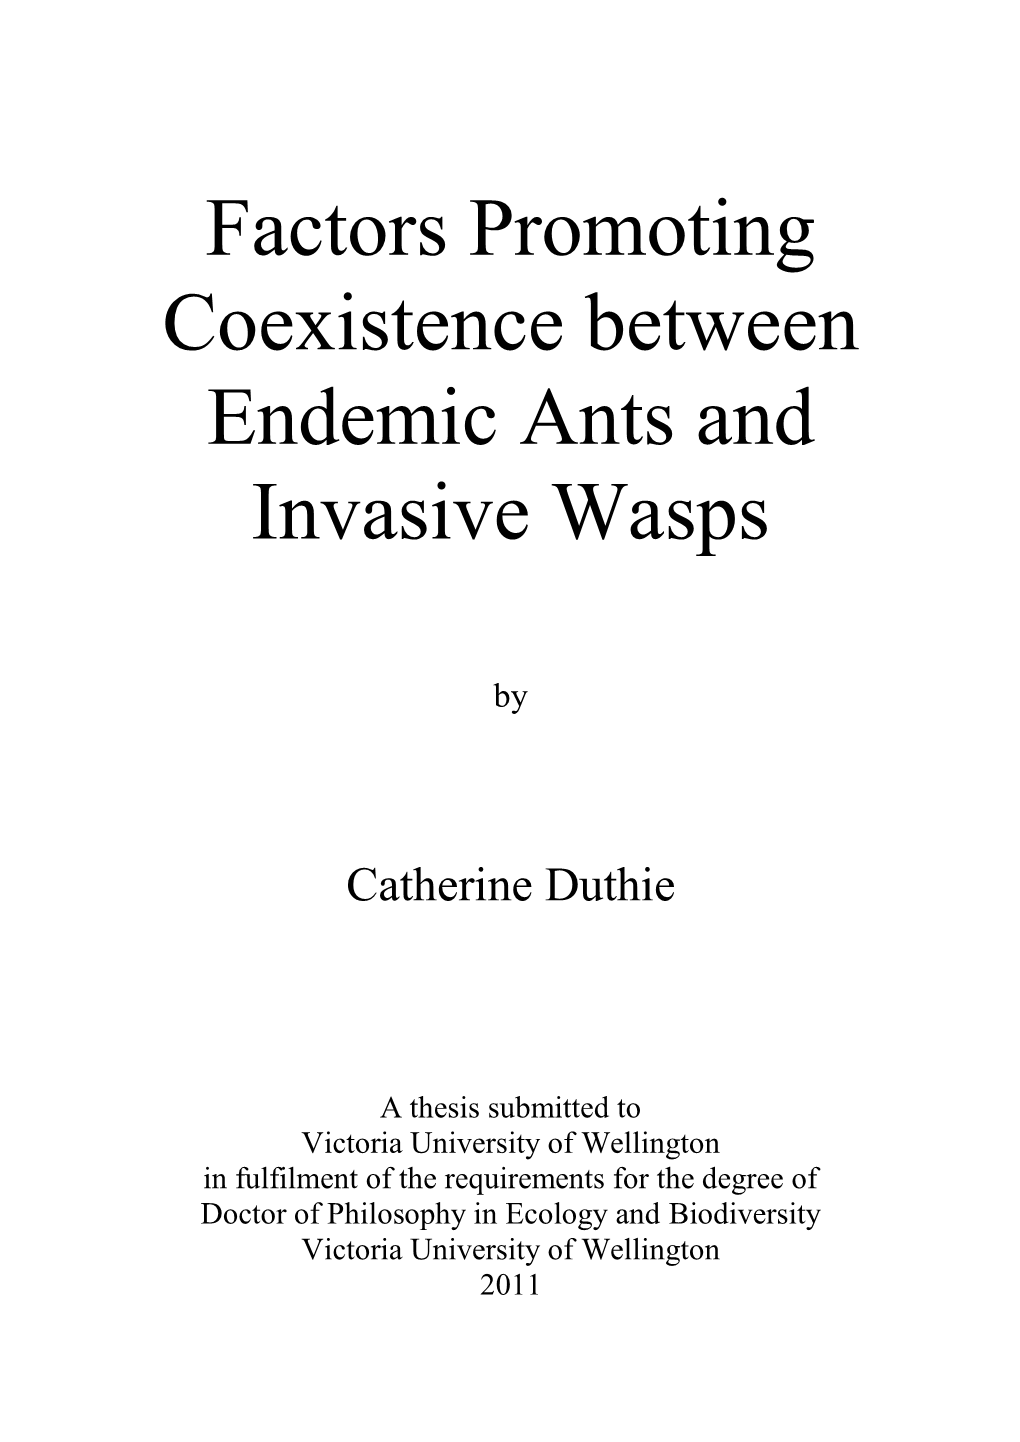 Factors Promoting Coexistence Between Endemic Ants and Invasive Wasps